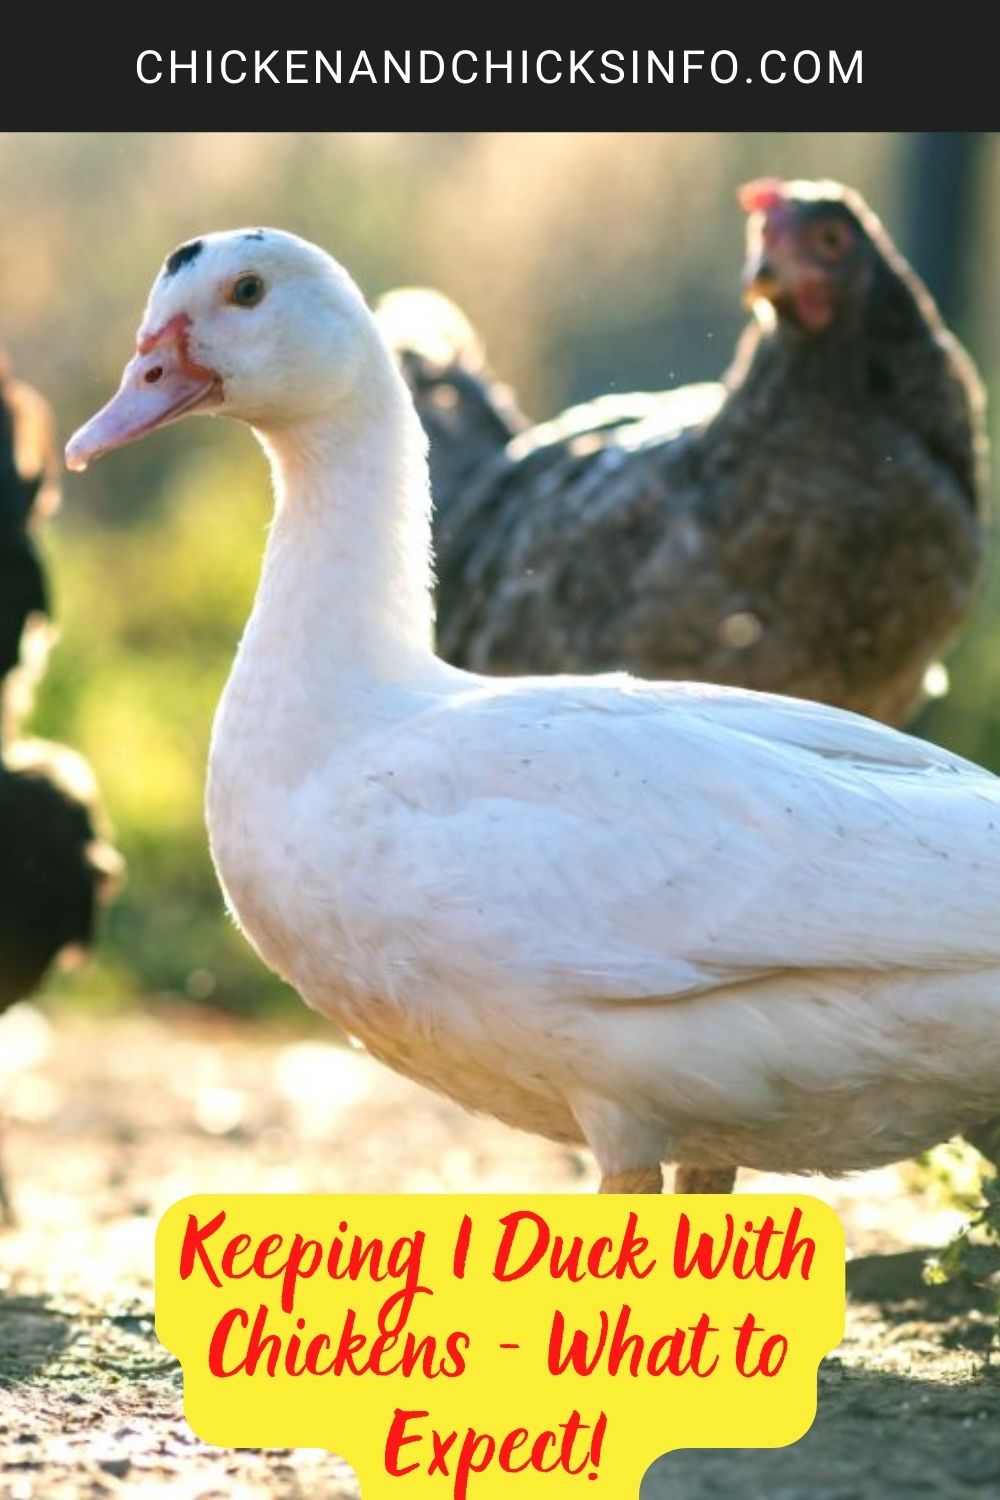 Keeping 1 Duck With Chickens - What to Expect! poster.
